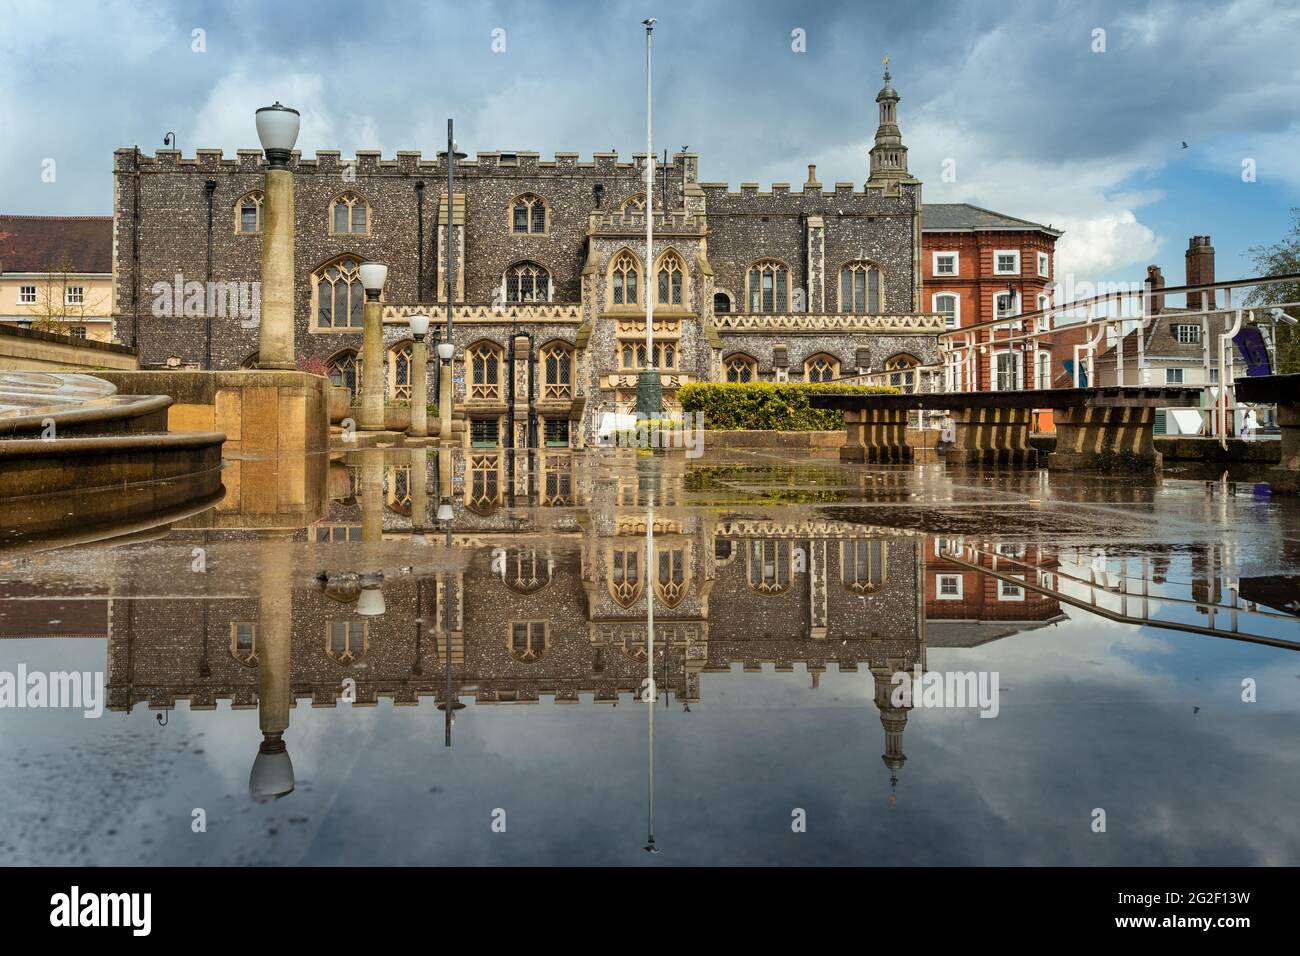 Norwich guildhall reflecting in rain water puddle Stock Photo